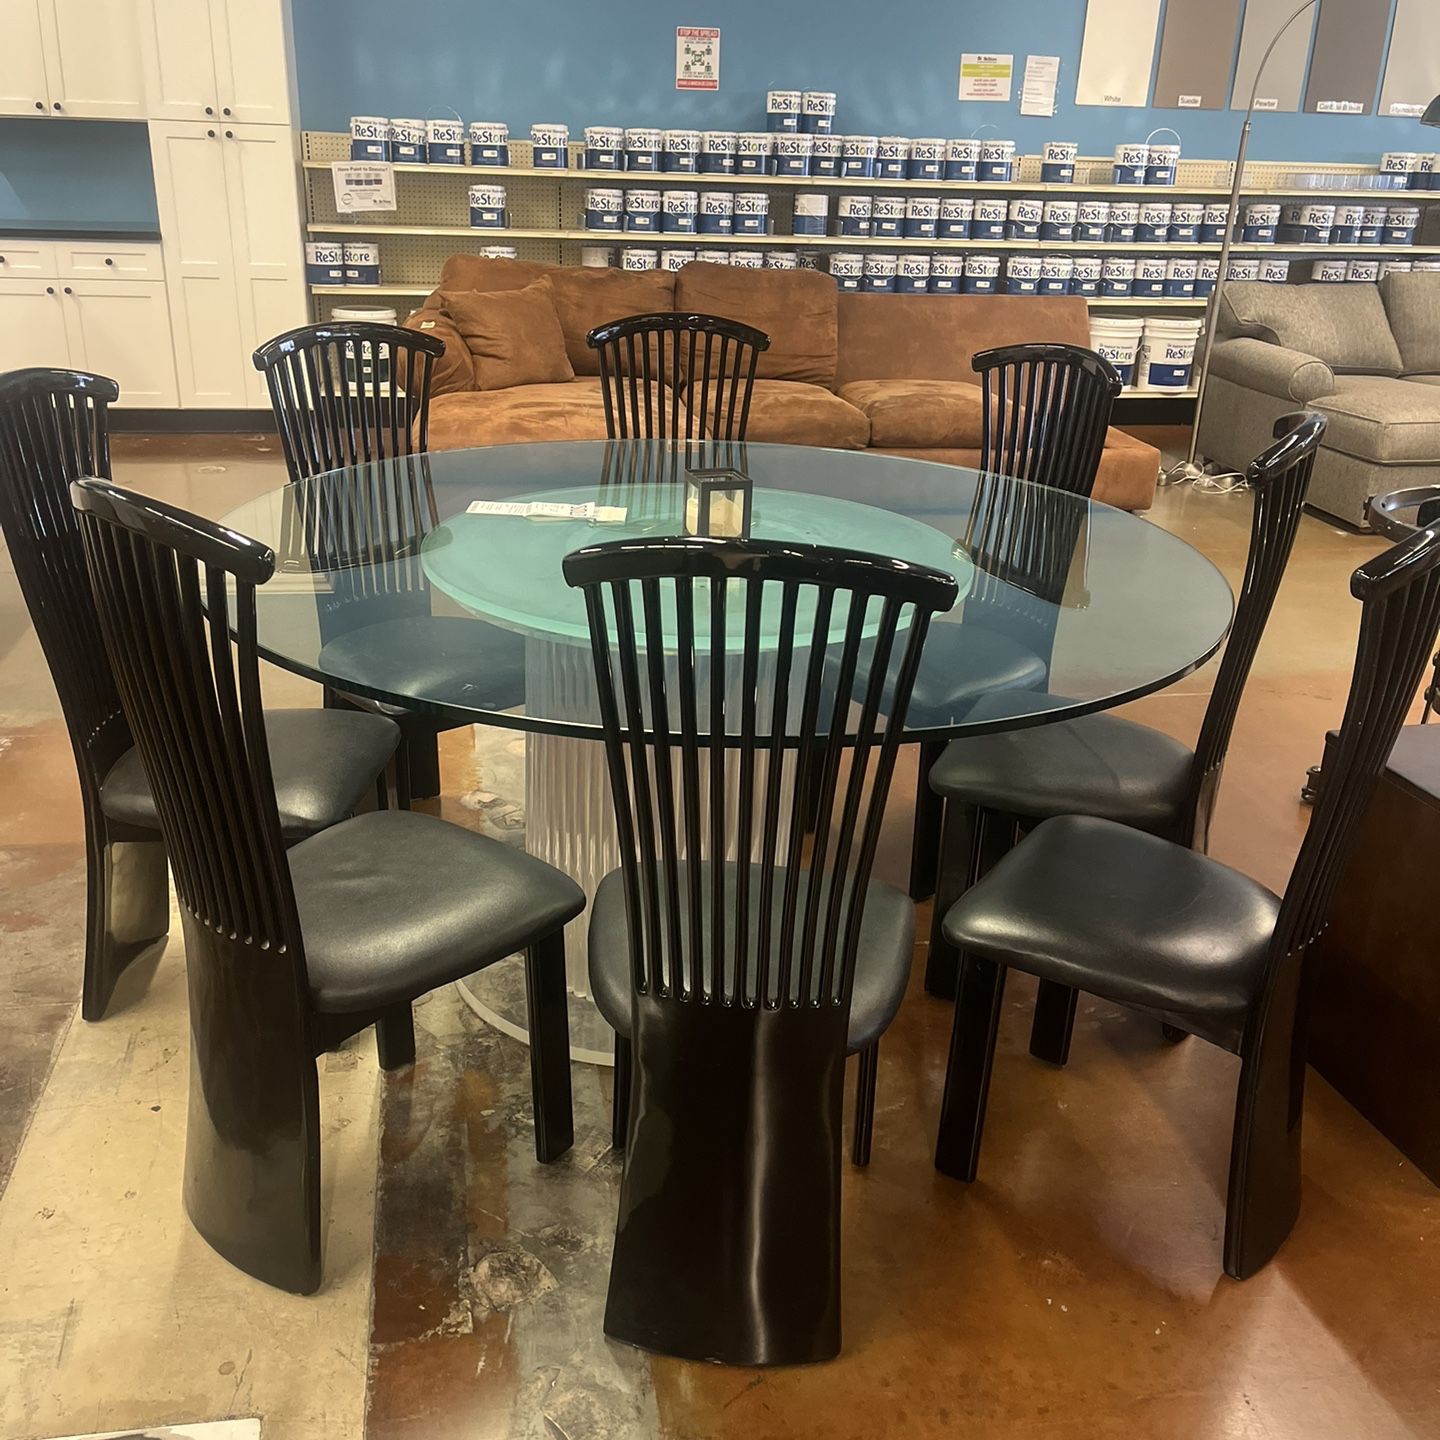 8 DINING CHAIRS in Excellent Condition